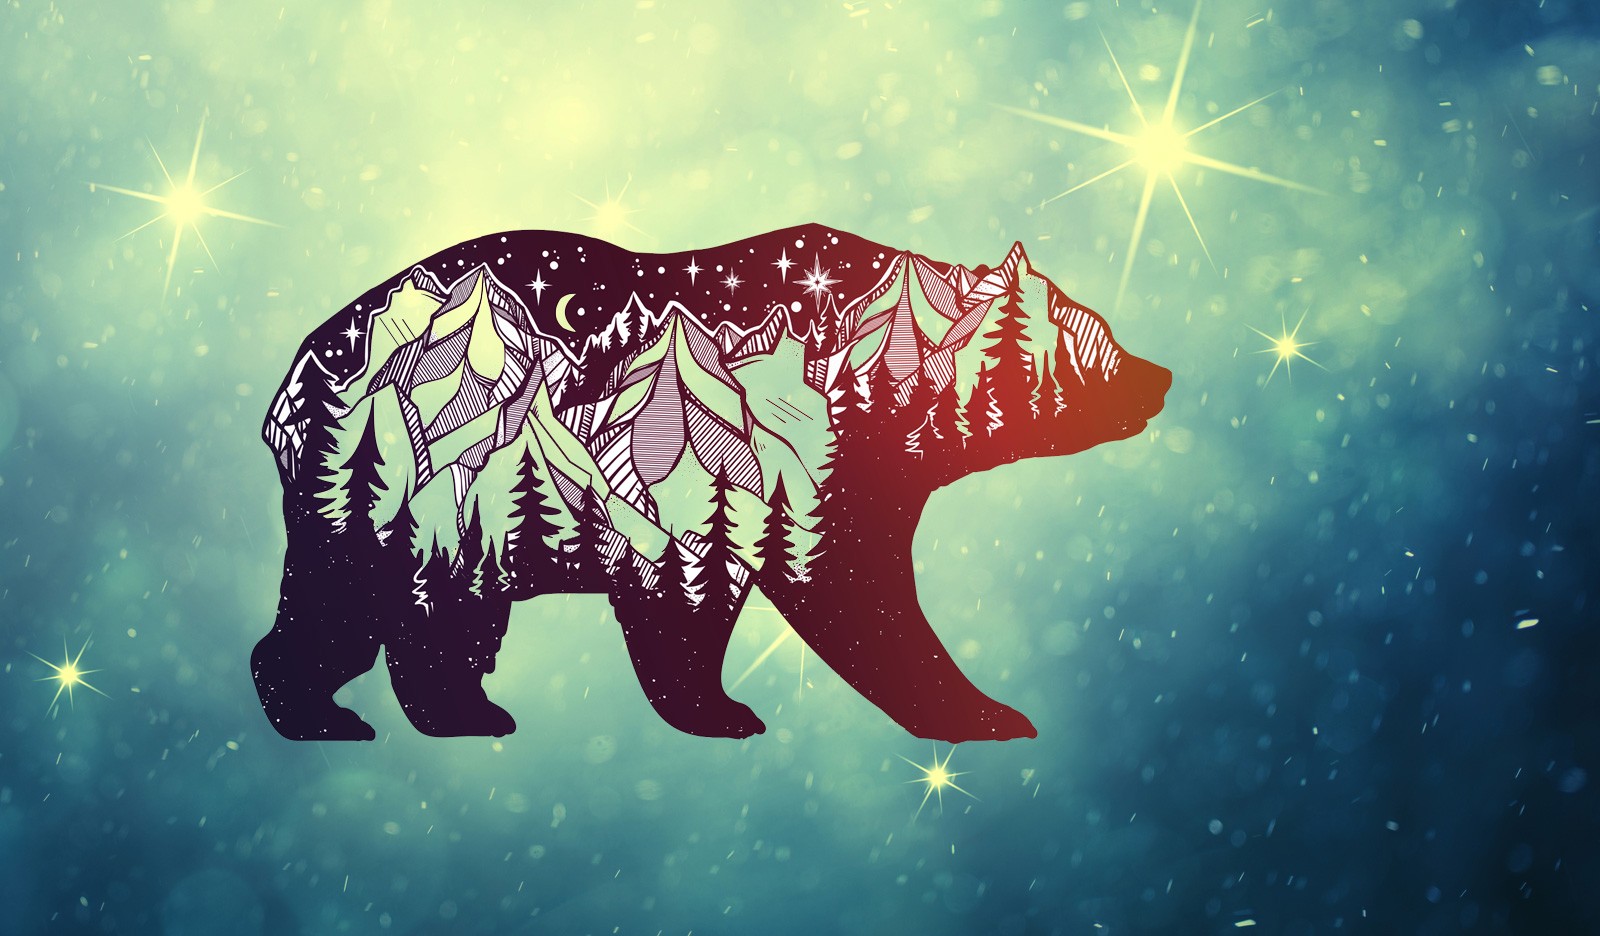 85 Rough Bear Tattoo Designs  Meanings  Feel The Wild Nature 2019